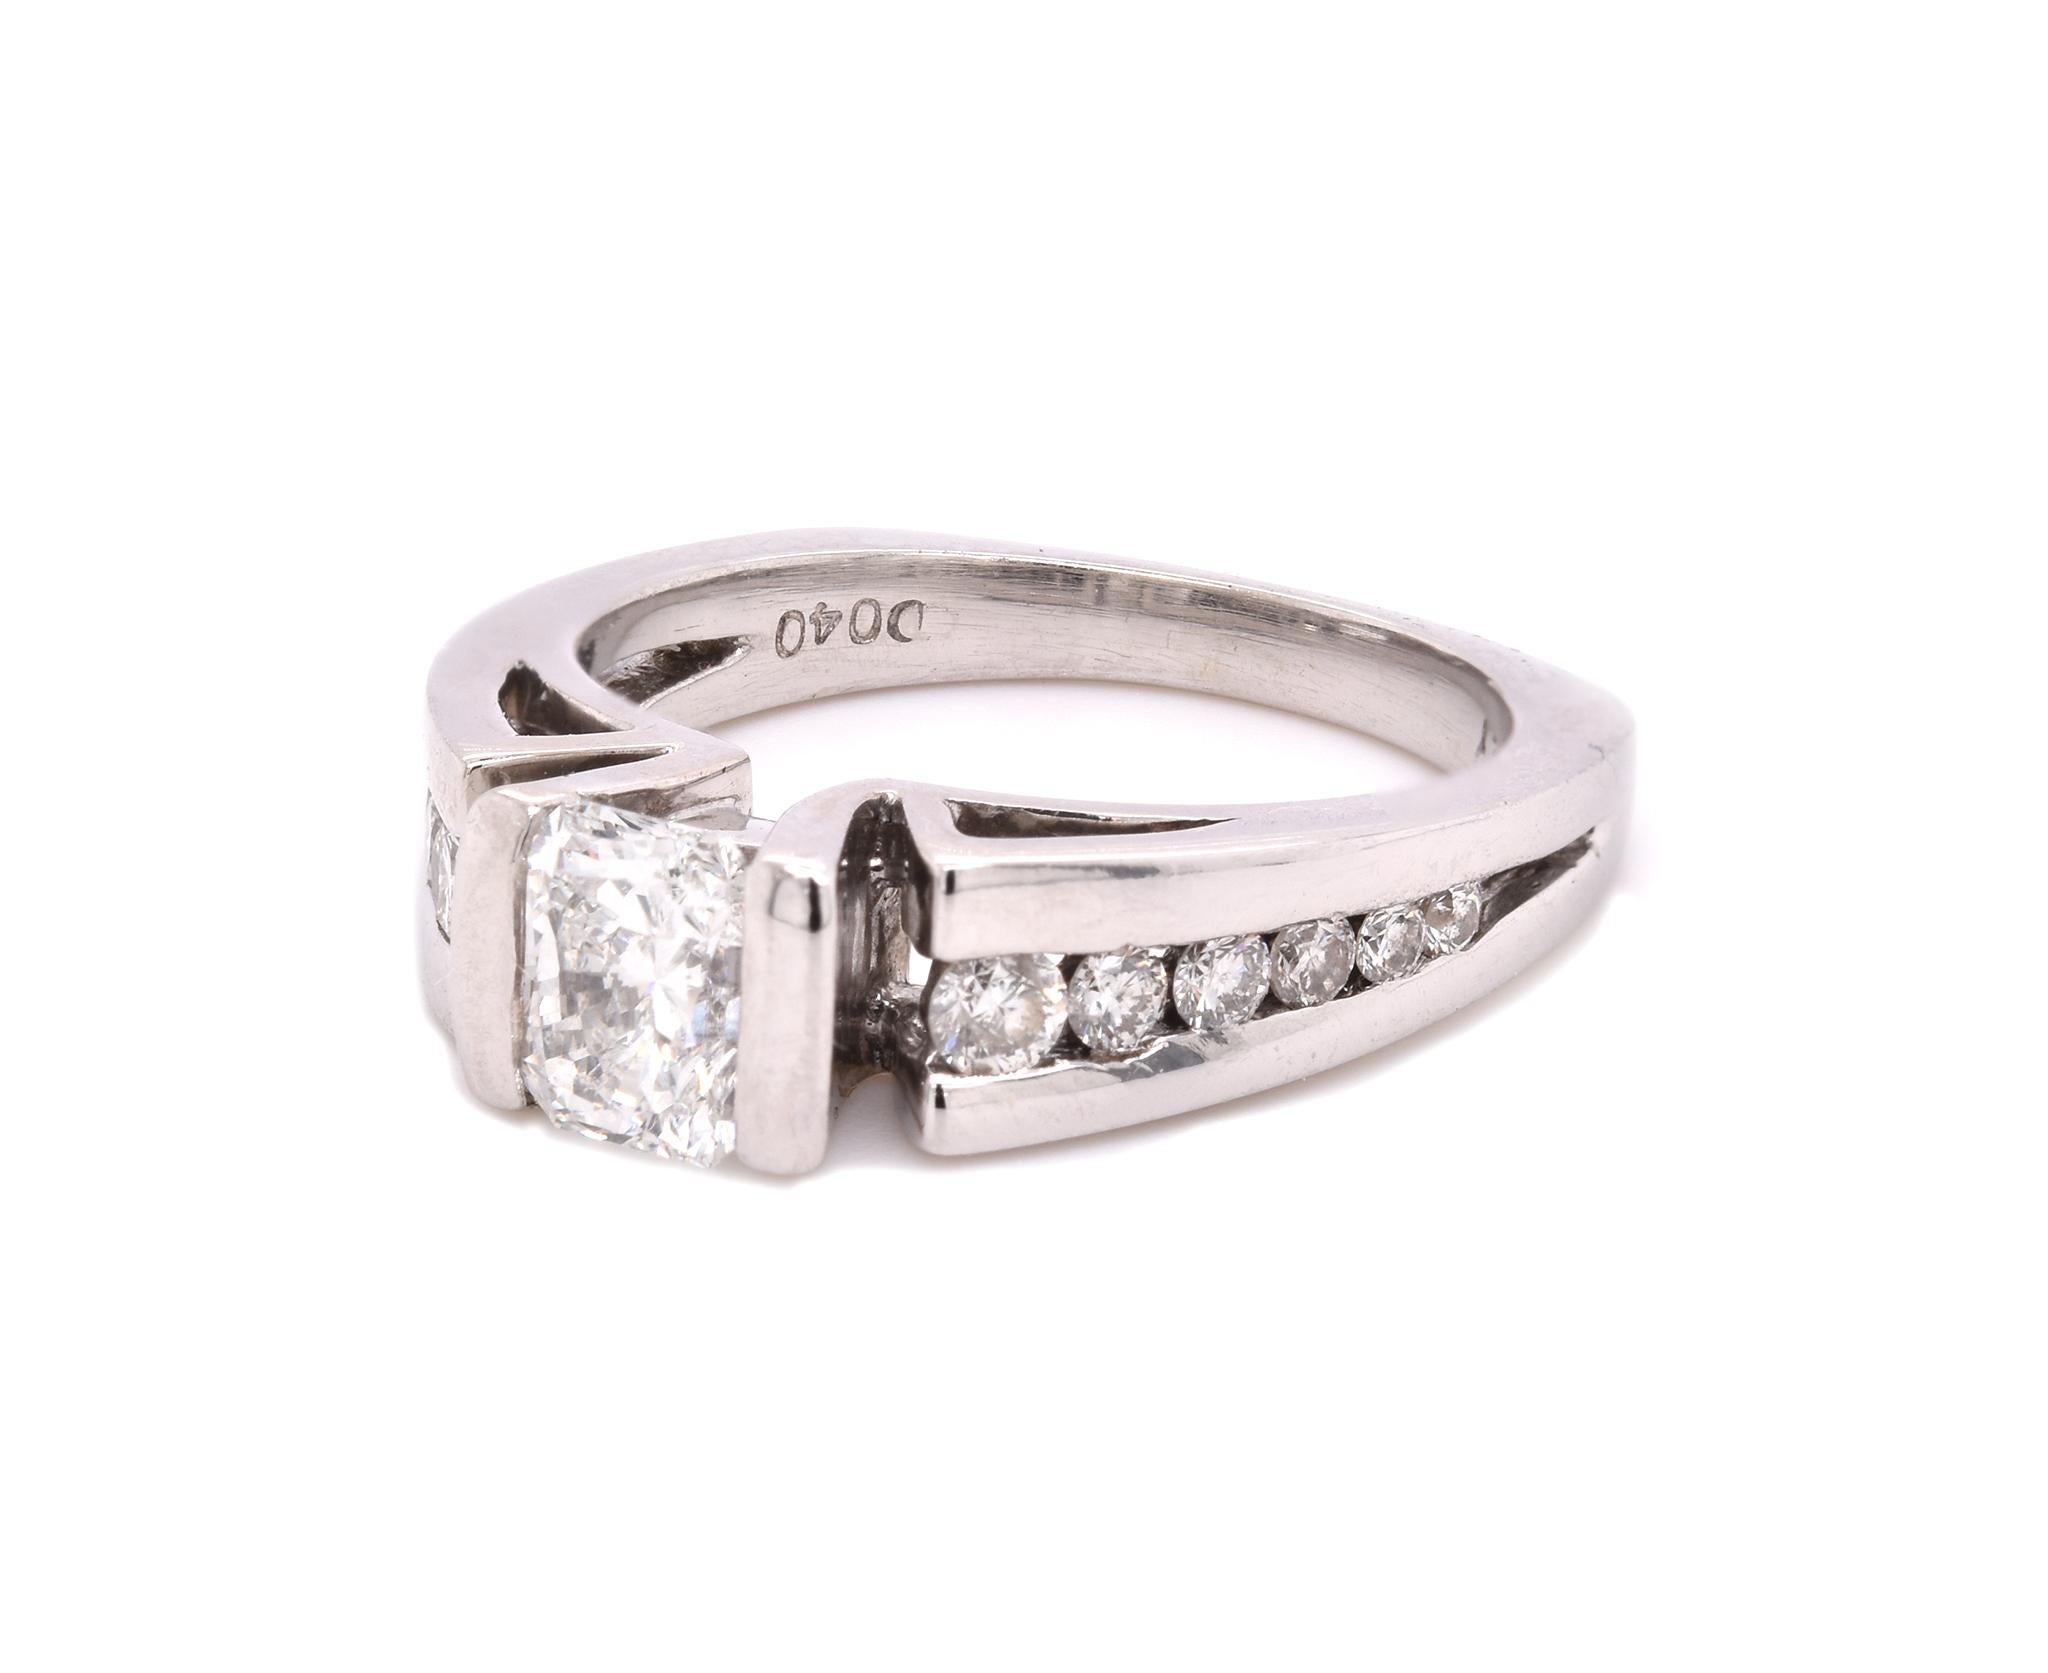 Material: 14k white gold
Center Diamond: 1 radiant cut = .77ct
Color: H
Clarity: VS1
Diamond: 12 round brilliant cut = .40cttw
Color: H
Clarity: VS1
Ring Size: 6.5  (please allow up to 2 additional business days for sizing requests)
Dimensions: ring